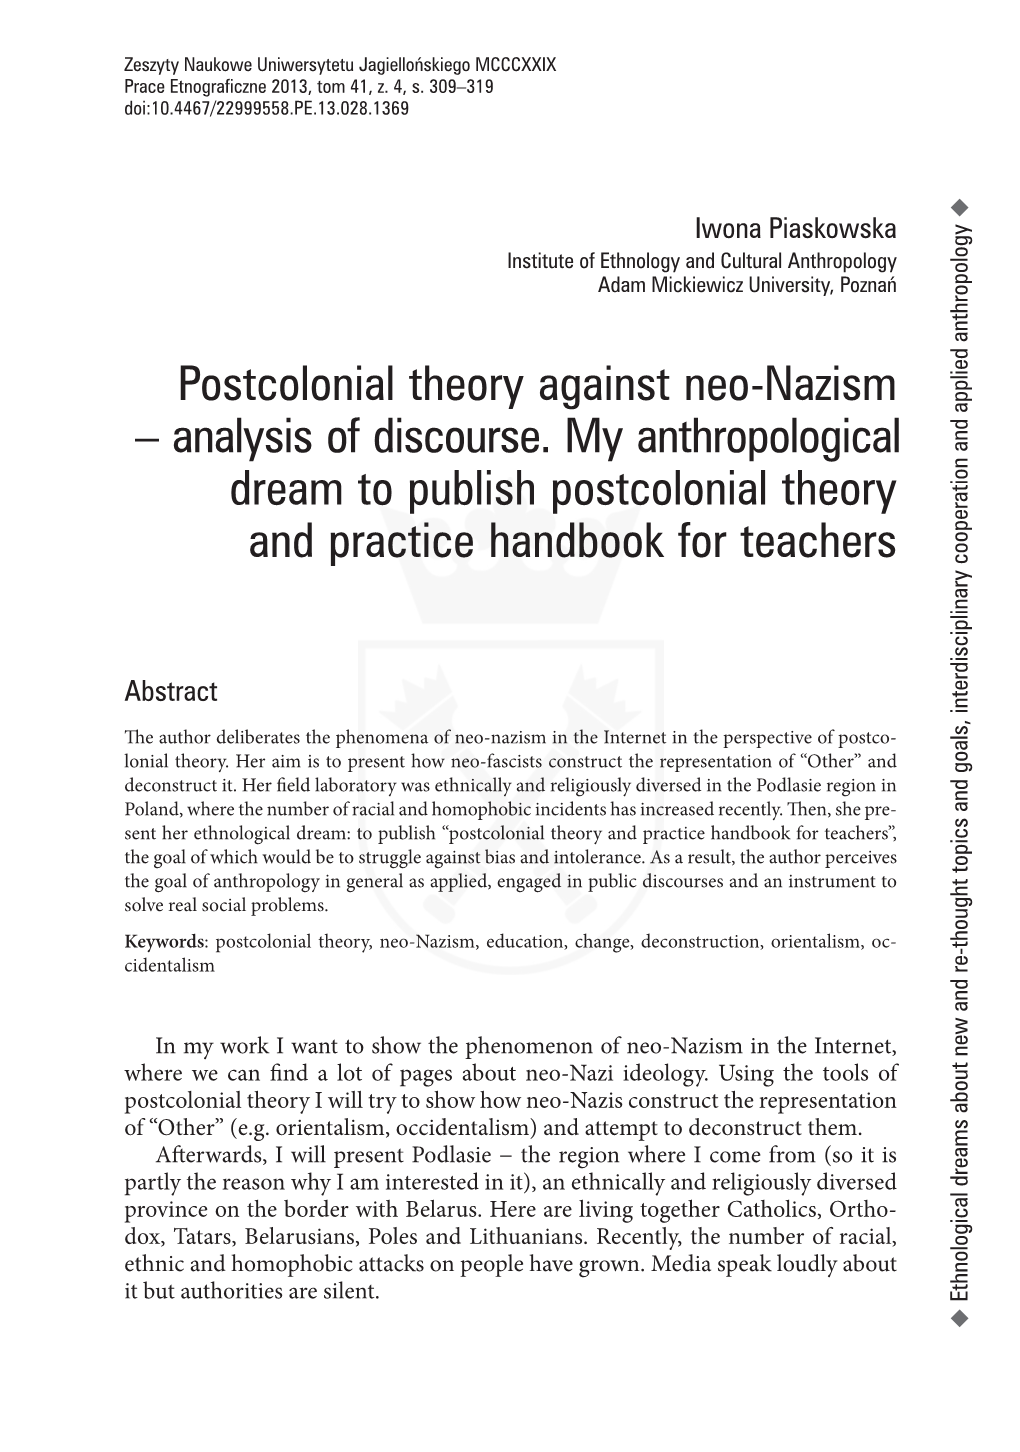 Postcolonial Theory Against Neo-Nazism – Analysis of Discourse. My Anthropological Dream to Publish Postcolonial Theory and Practice Handbook for Teachers